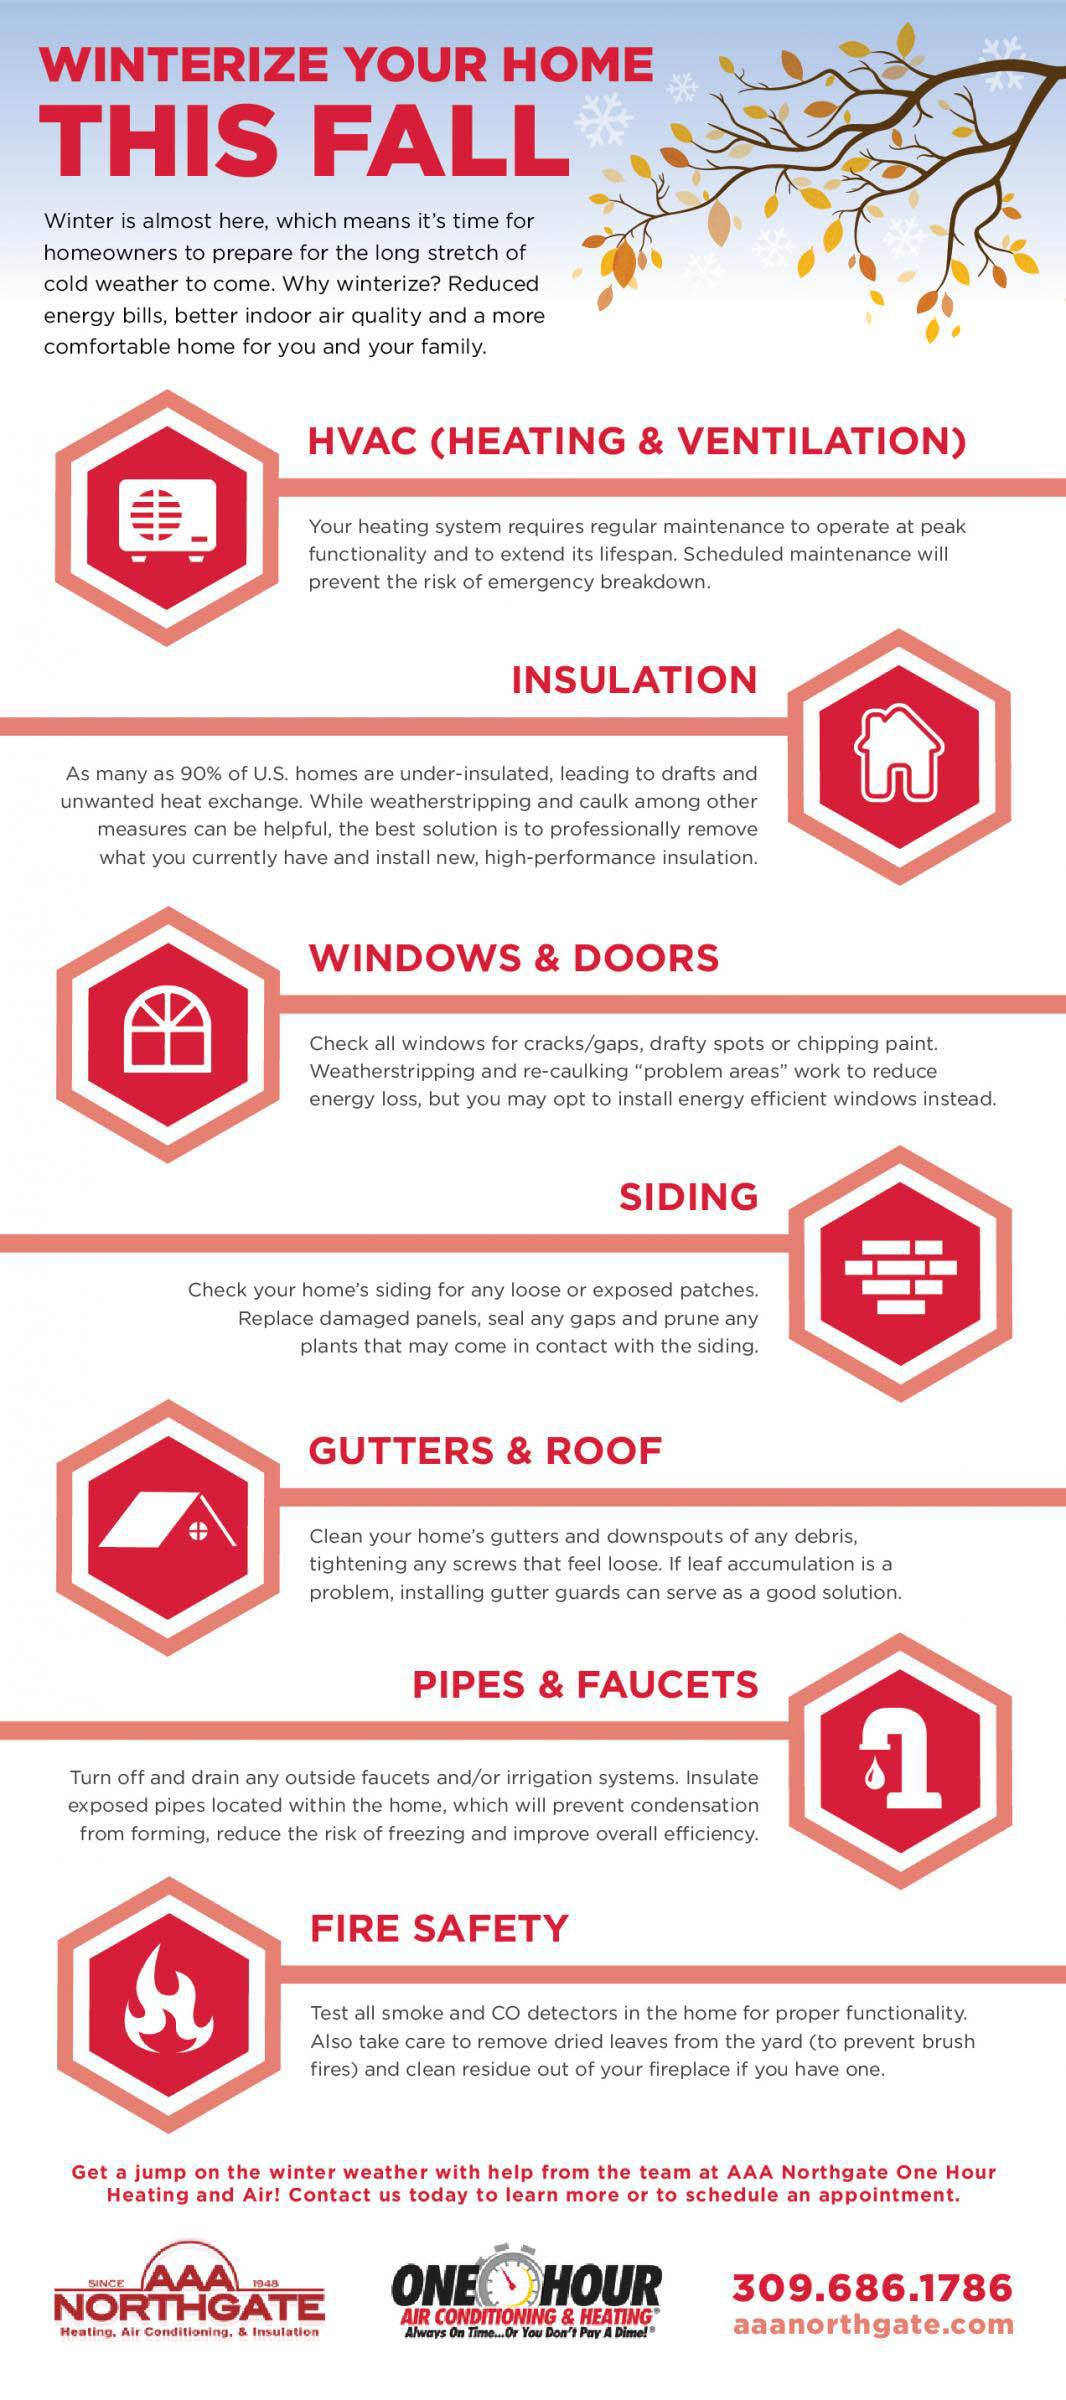 winterize your home this fall infographic